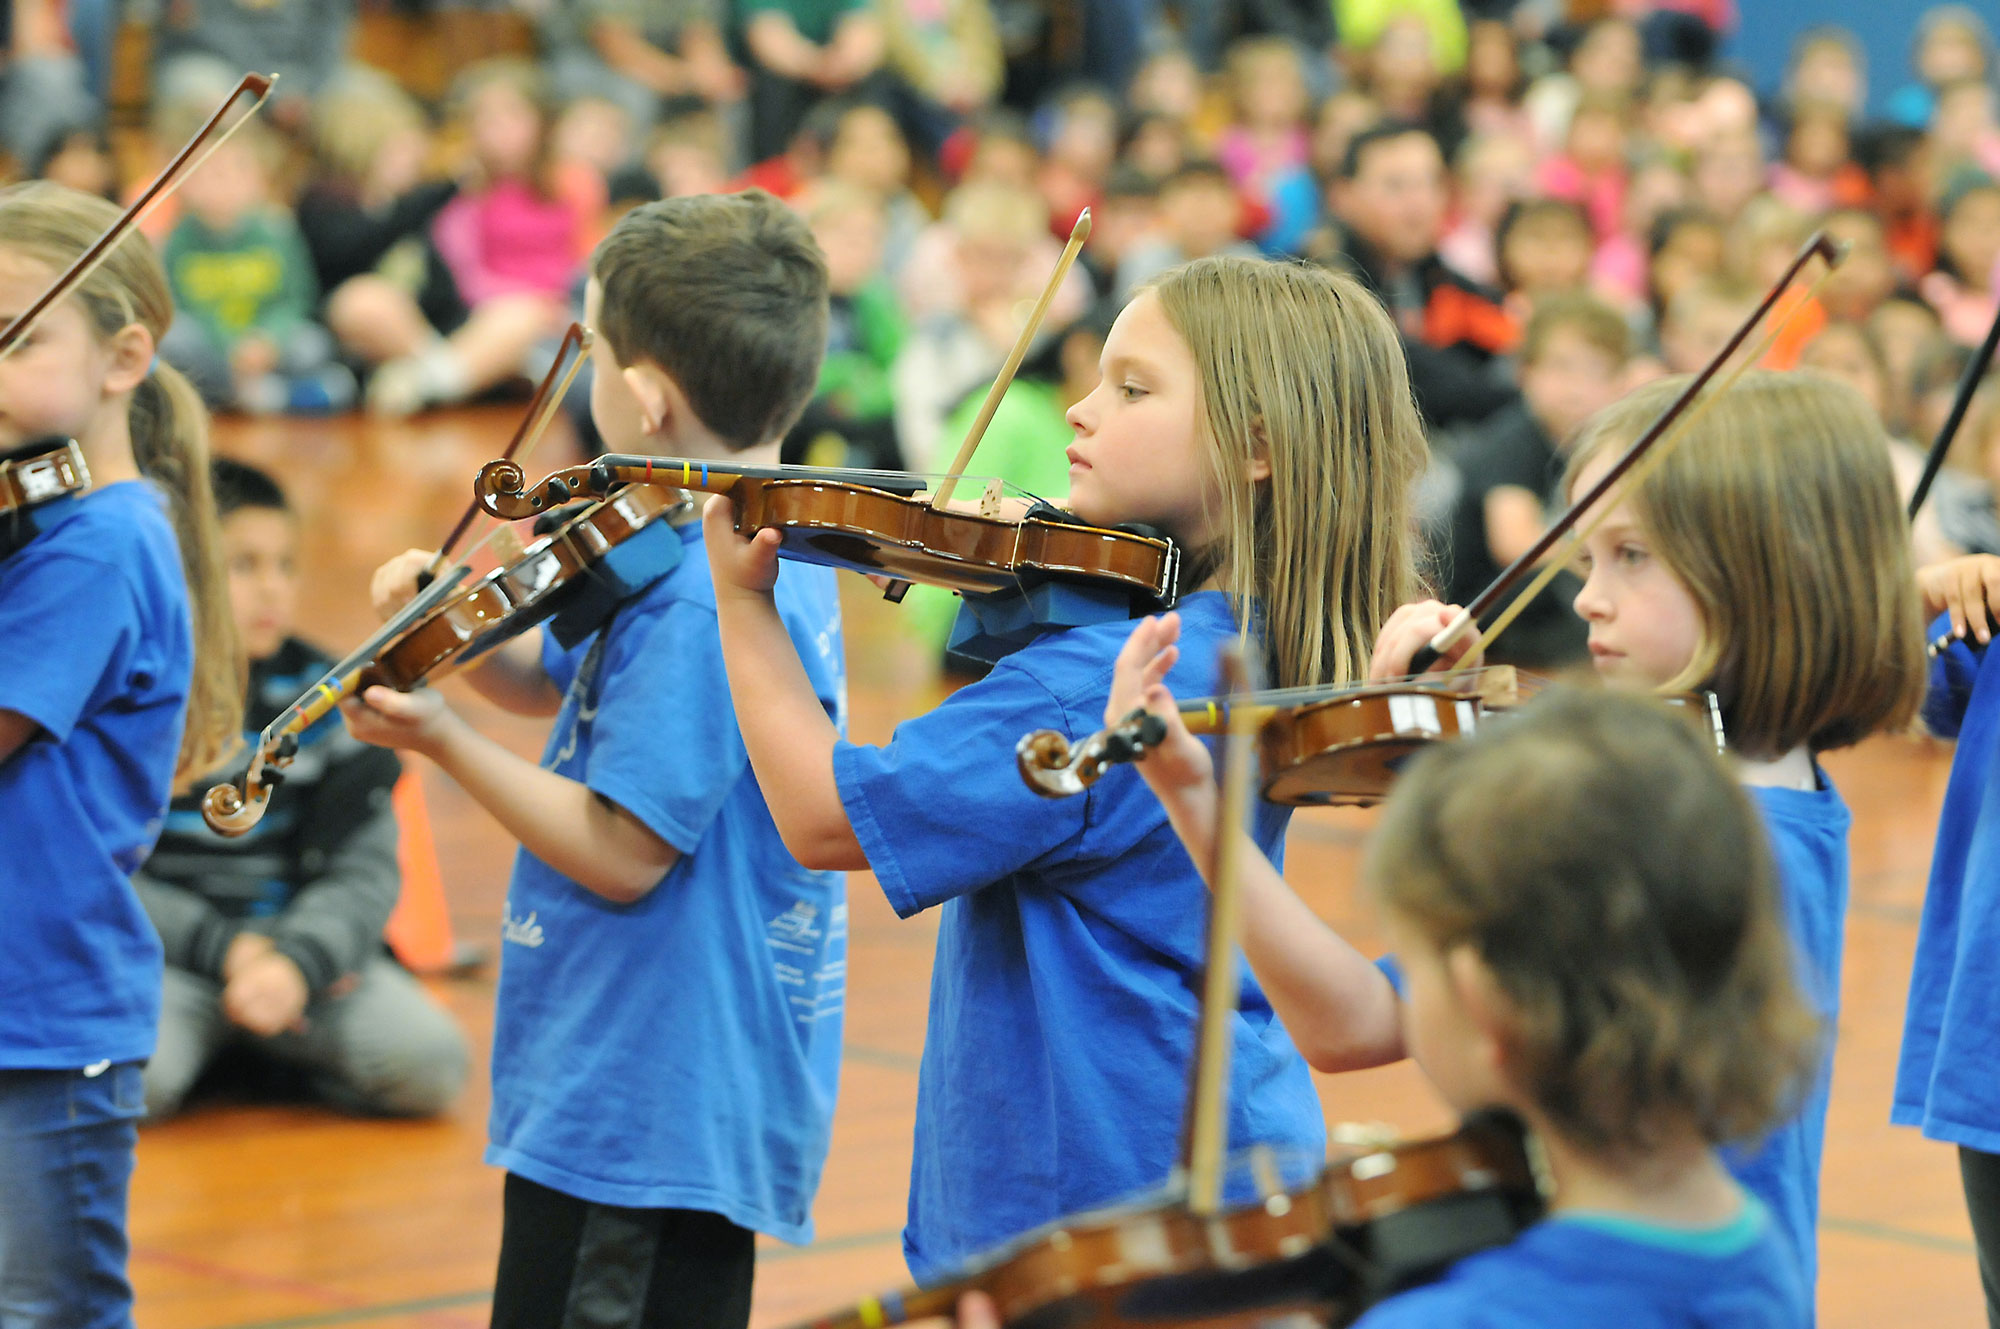 Student musicians playing violins